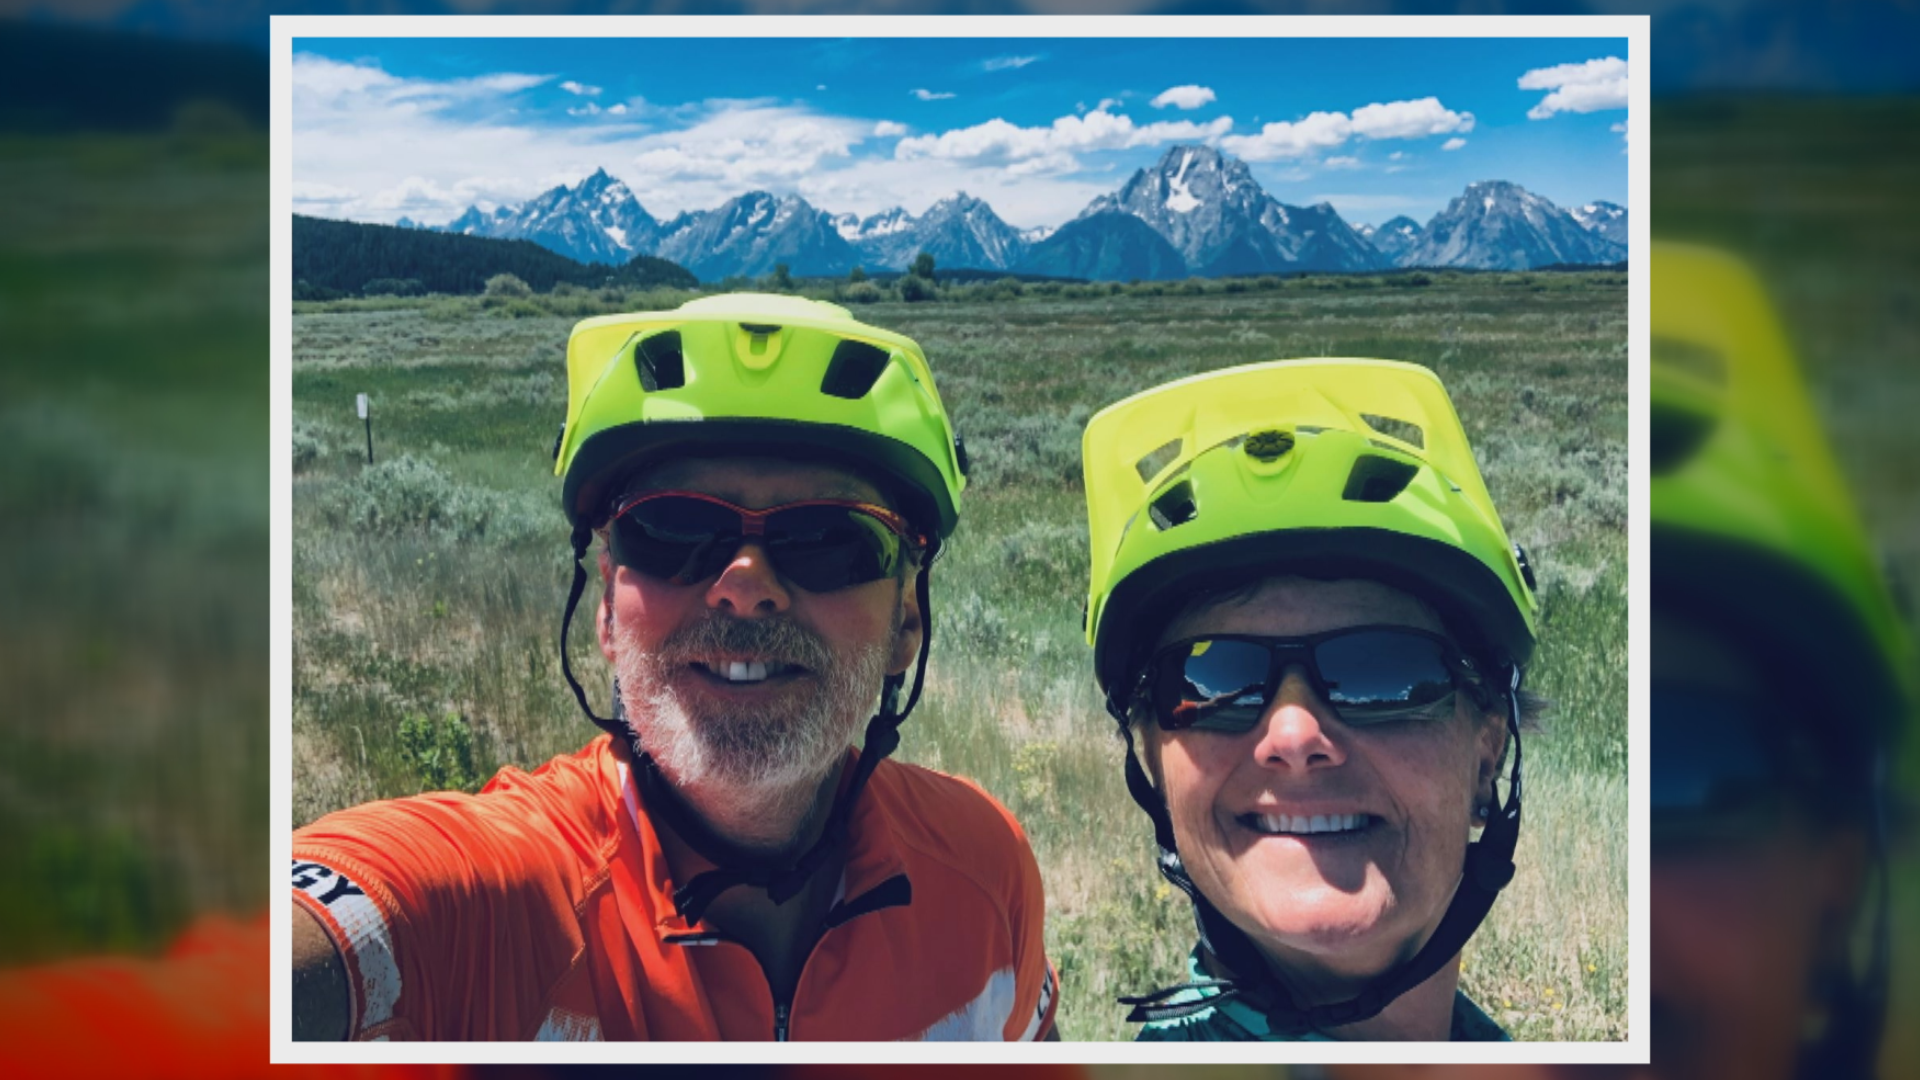 Kim and John Motschenbacher have been riding their bikes across America with a goal of raising $100,000 to advance invasive lobular carcinoma research.